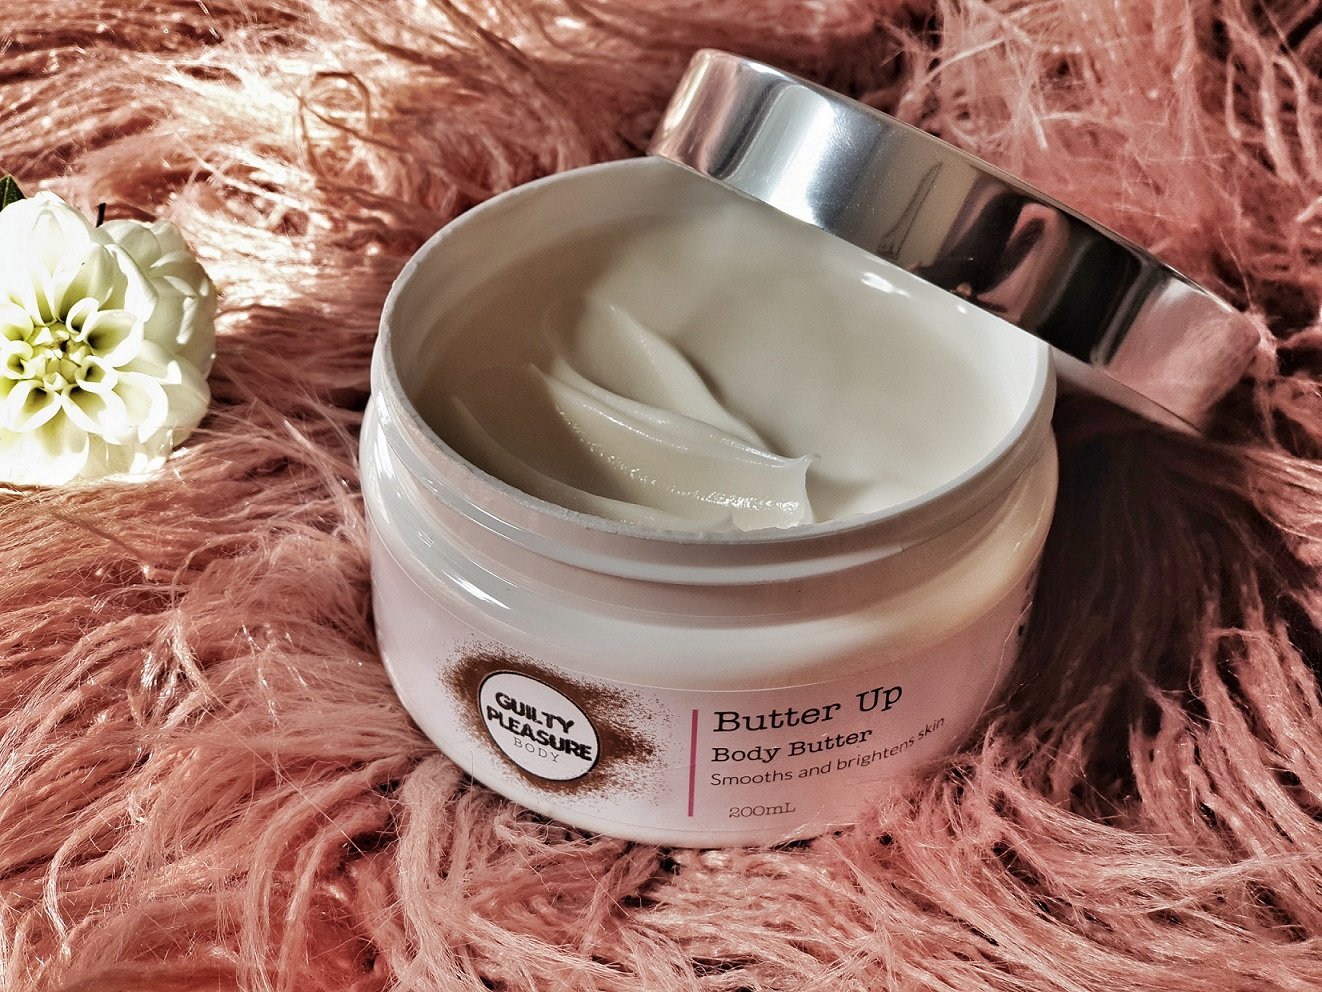 Guilty Pleasure | Body Butter, Hair Treatment & Lip Balm – Review | Style & Life by Susana